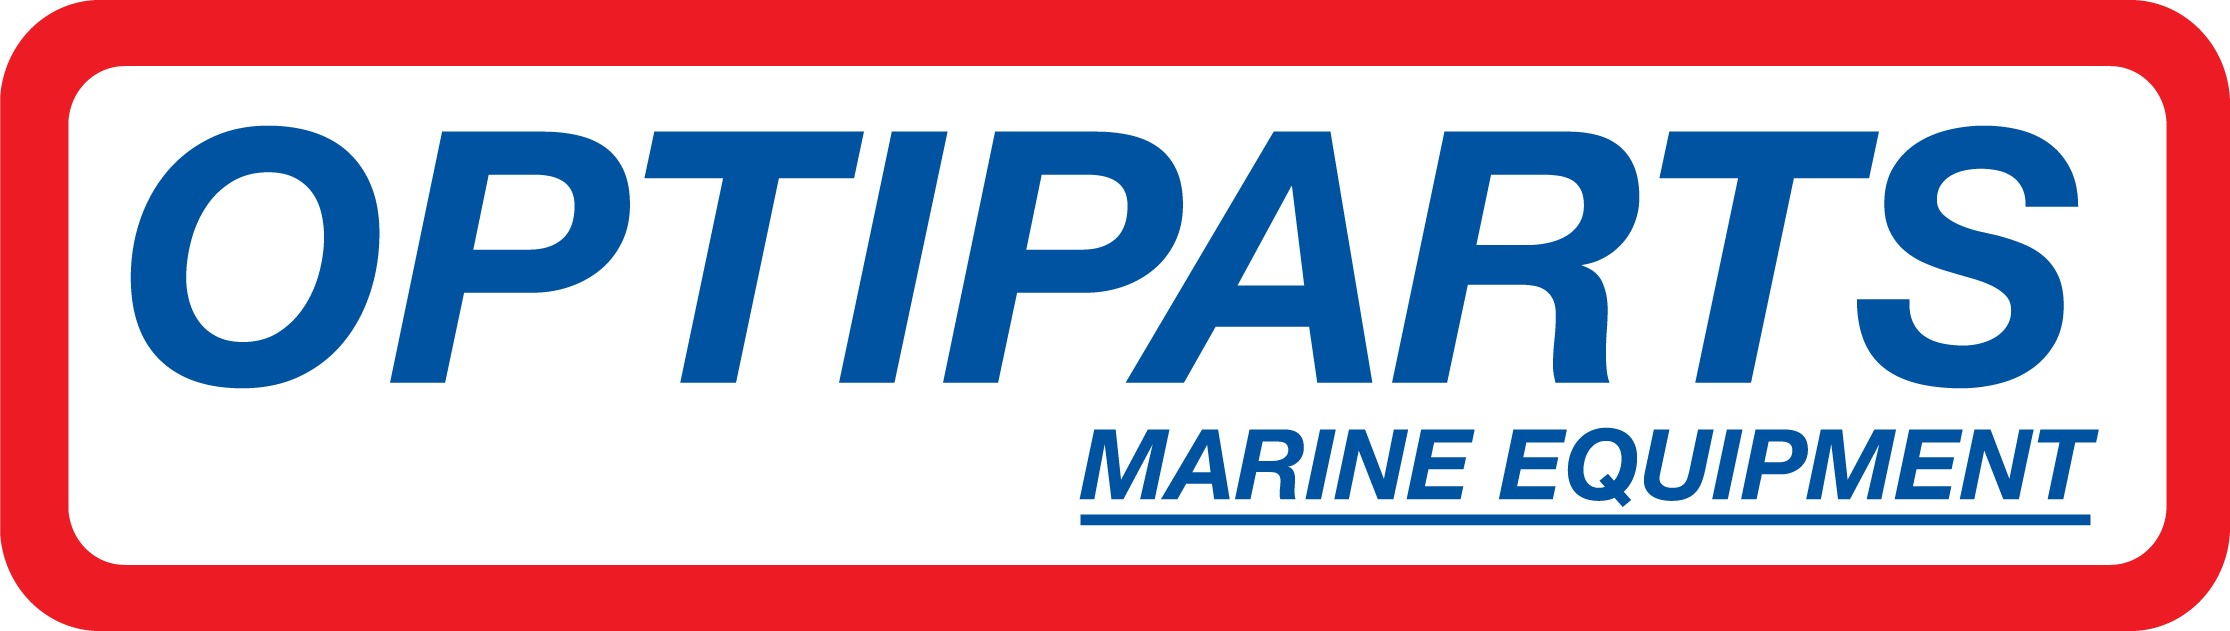 OPTIPARTS-logo-red-blue.png